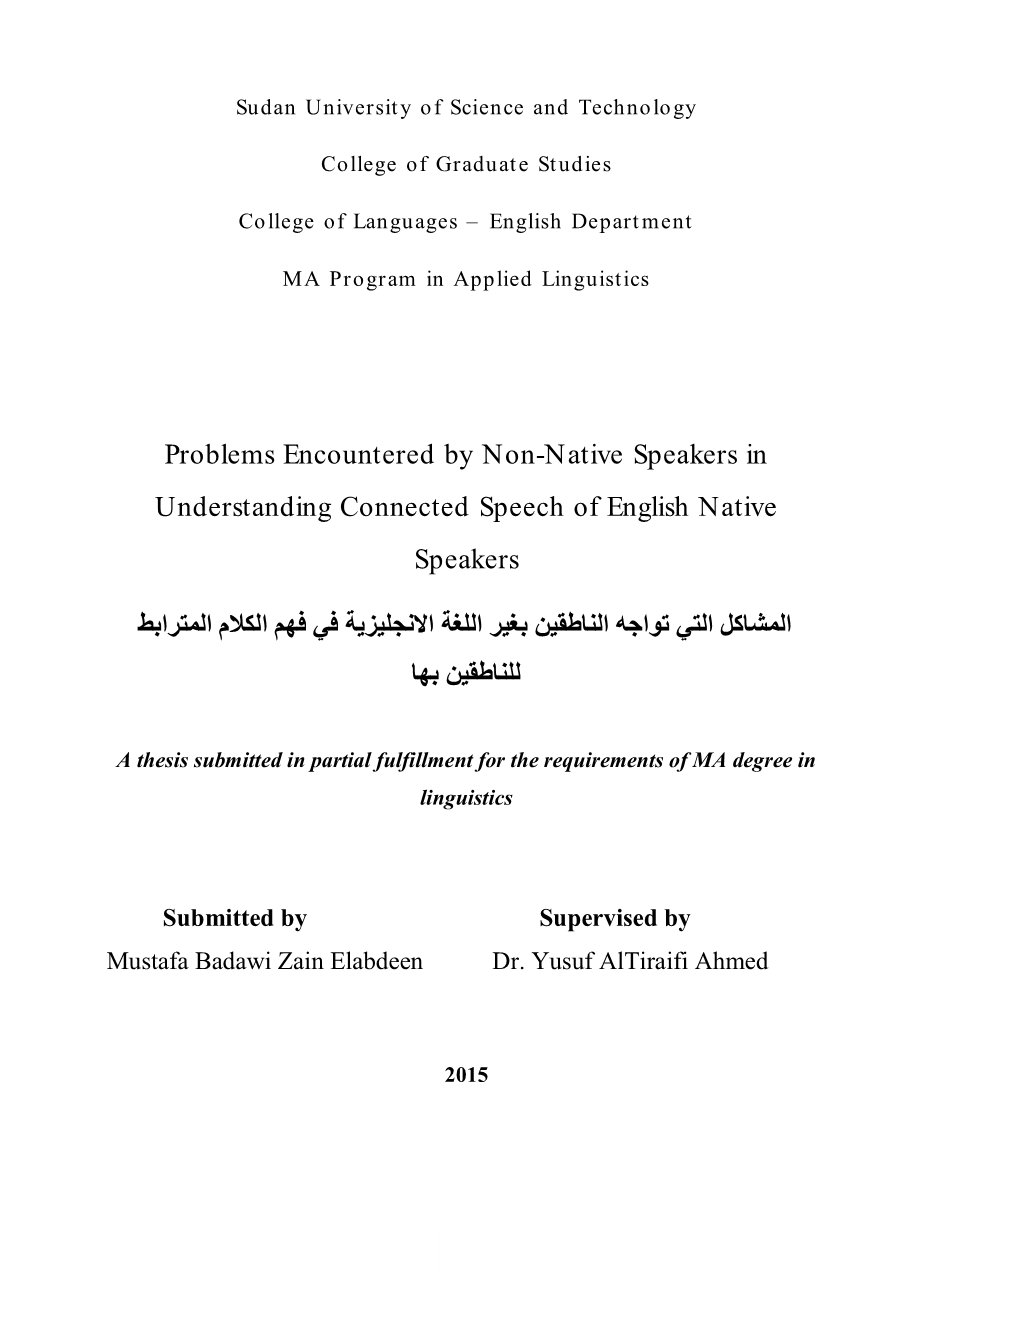 Problems Encountered by Non-Native Speakers in Understanding Connected Speech of English Native Speakers